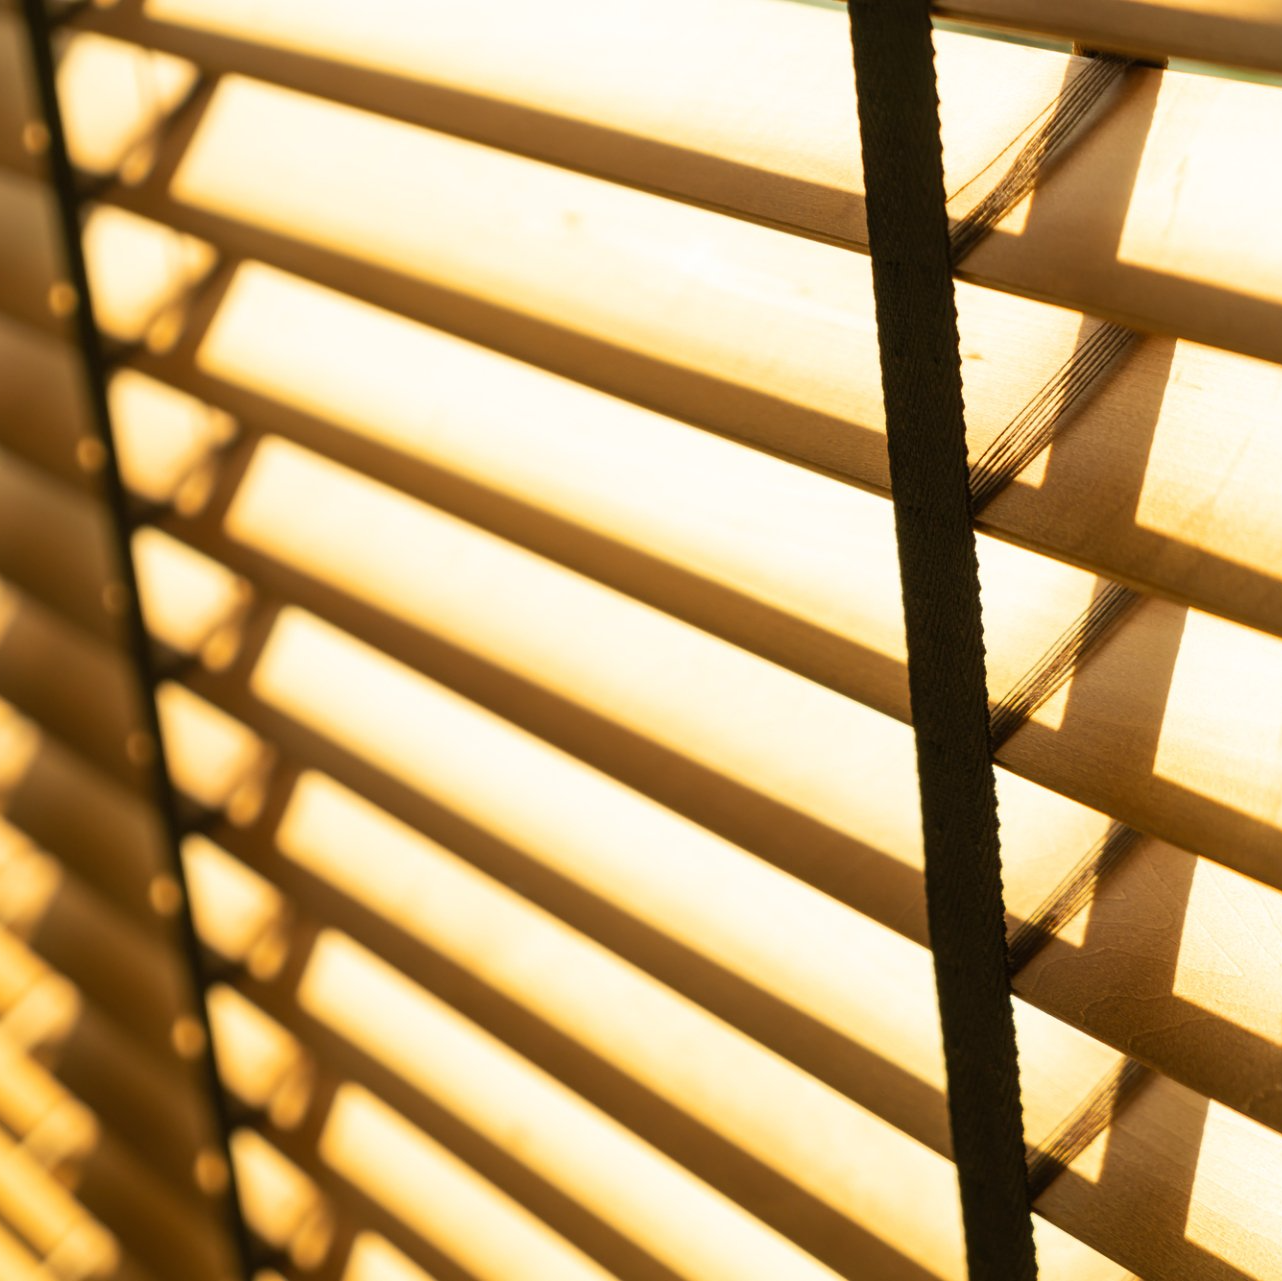 Close up of timber venetian blind, half open letting sunlight through.